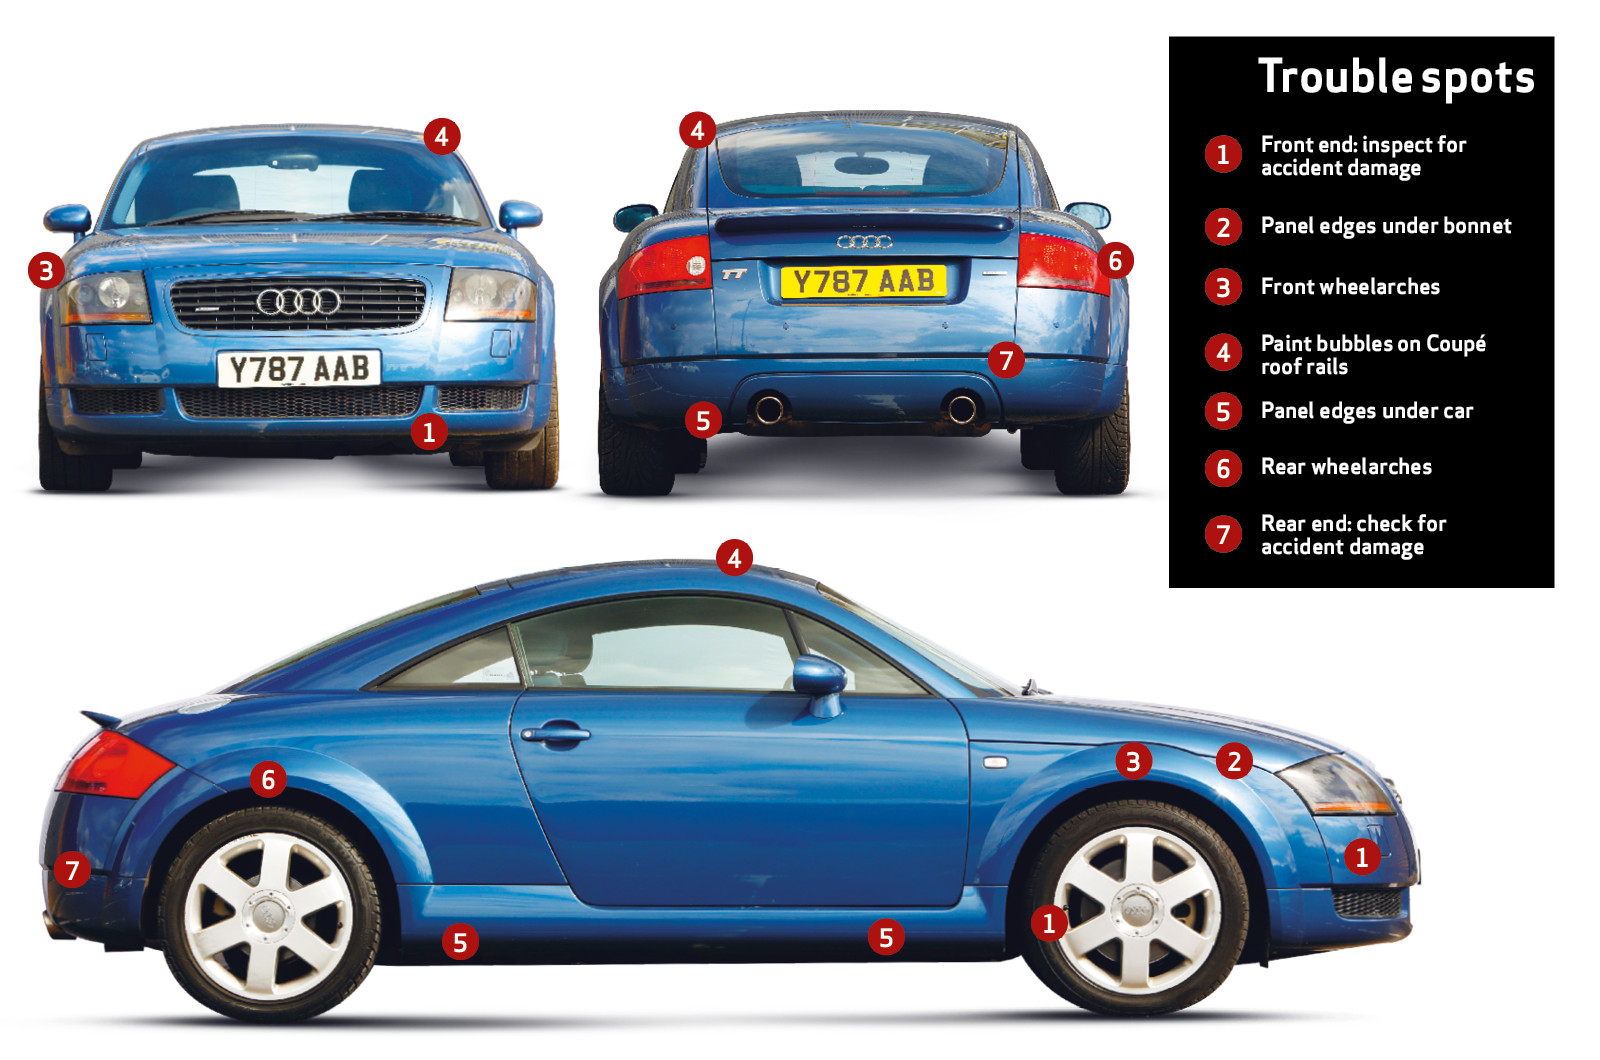 First-generation Audi TT, Buyer's Guide, Articles